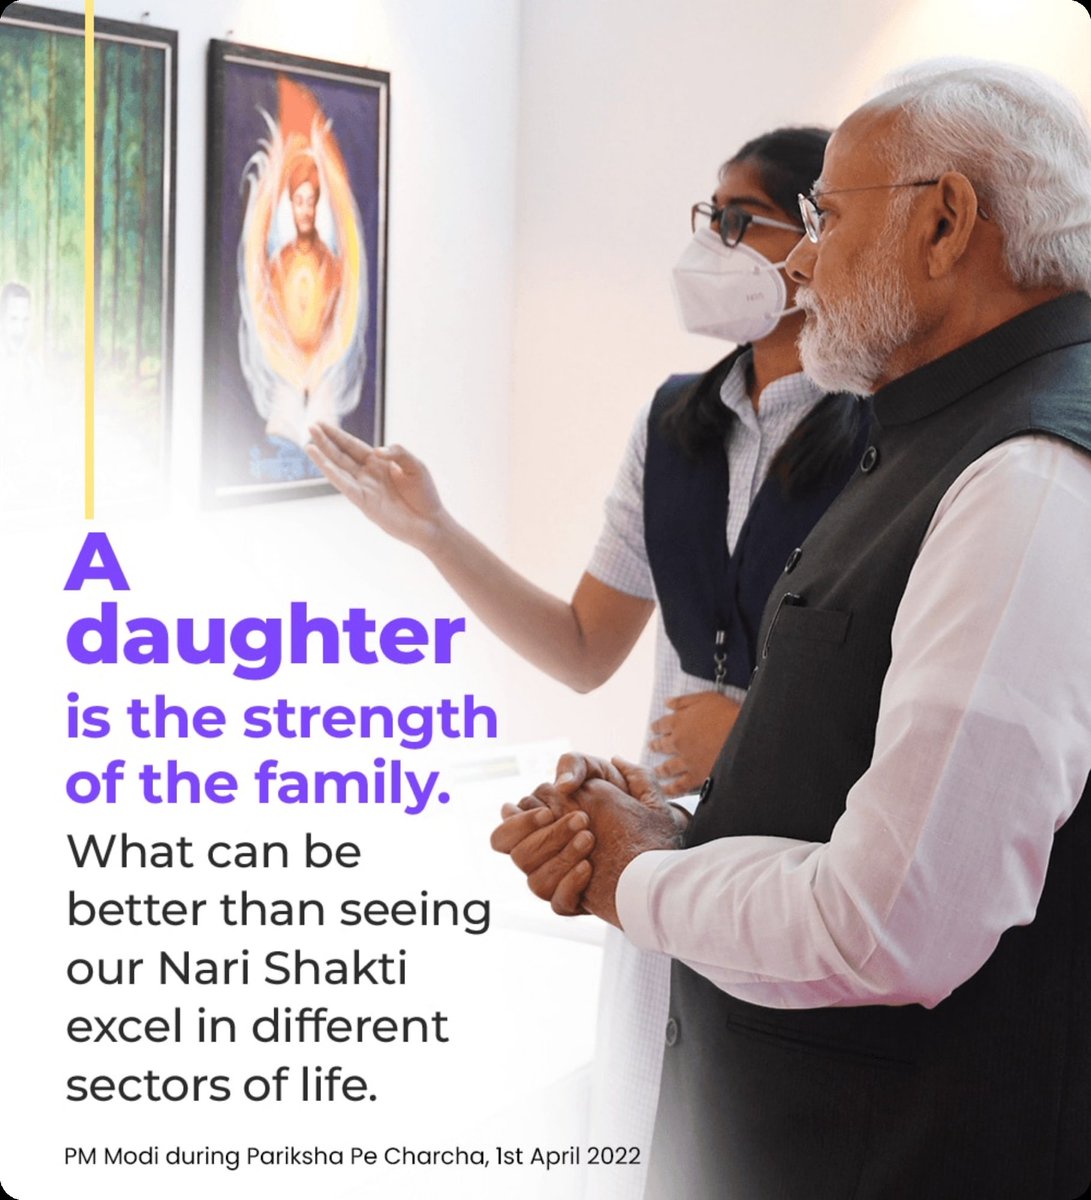 A daughter is the strength of the family.